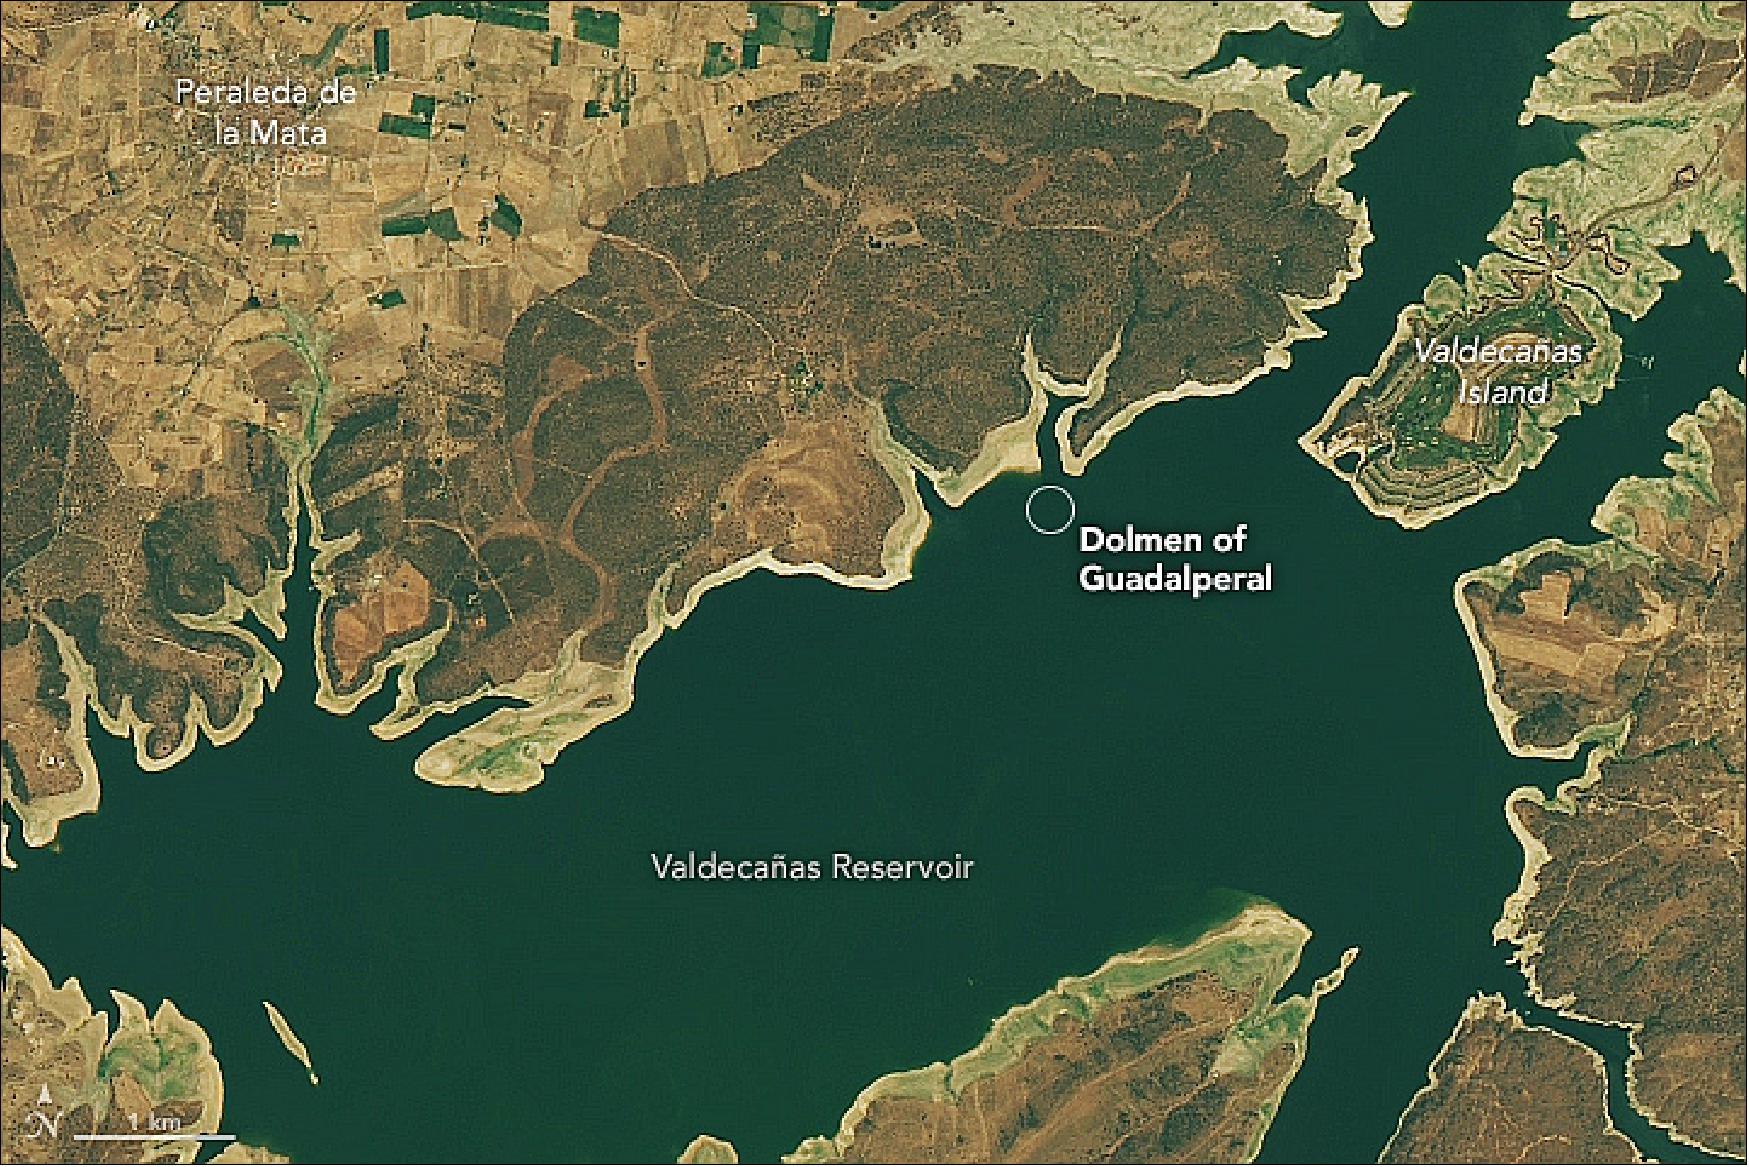 Figure 33: OLI on Landsat-8 acquired this image of the Valdecañas Reservoir on 24 July 2013 (image credit: NASA Earth Observatory, image by Lauren Dauphin, using Landsat data from the U.S. Geological Survey, story by Kasha Patel)